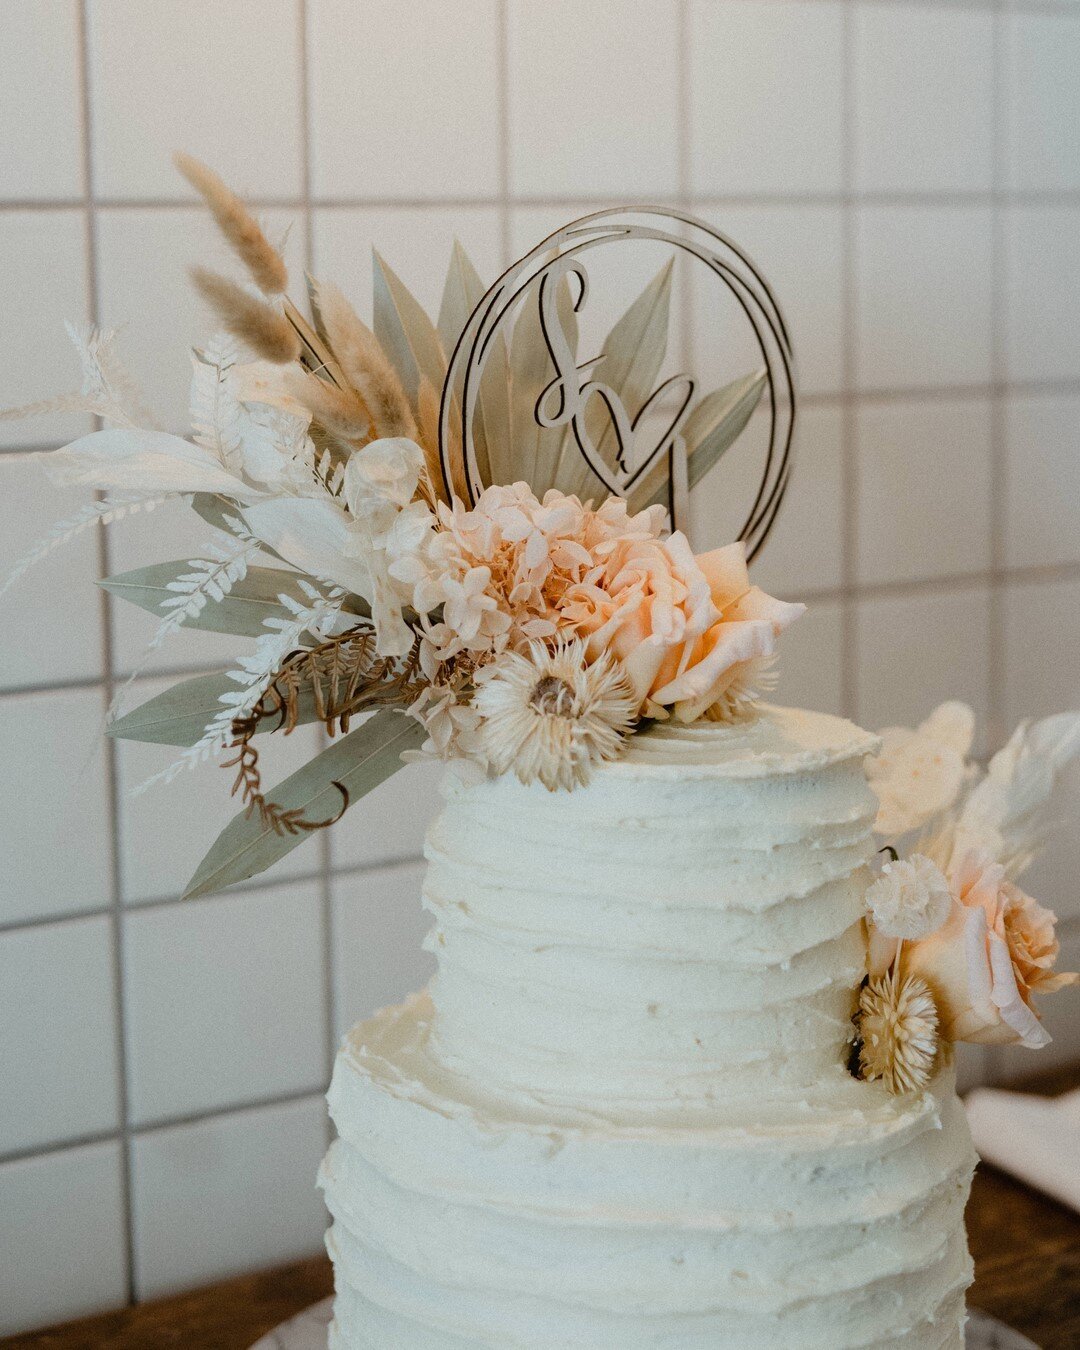 When the flowers look just as delicious as the cake!⠀⠀⠀⠀⠀⠀⠀⠀⠀
⠀⠀⠀⠀⠀⠀⠀⠀⠀
Dried blooms with a touch of fresh for Josh and Steph&rsquo;s wedding back in May at @beachsidedojomanly ⠀⠀⠀⠀⠀⠀⠀⠀⠀
⠀⠀⠀⠀⠀⠀⠀⠀⠀
Image @kellyjuryphotography